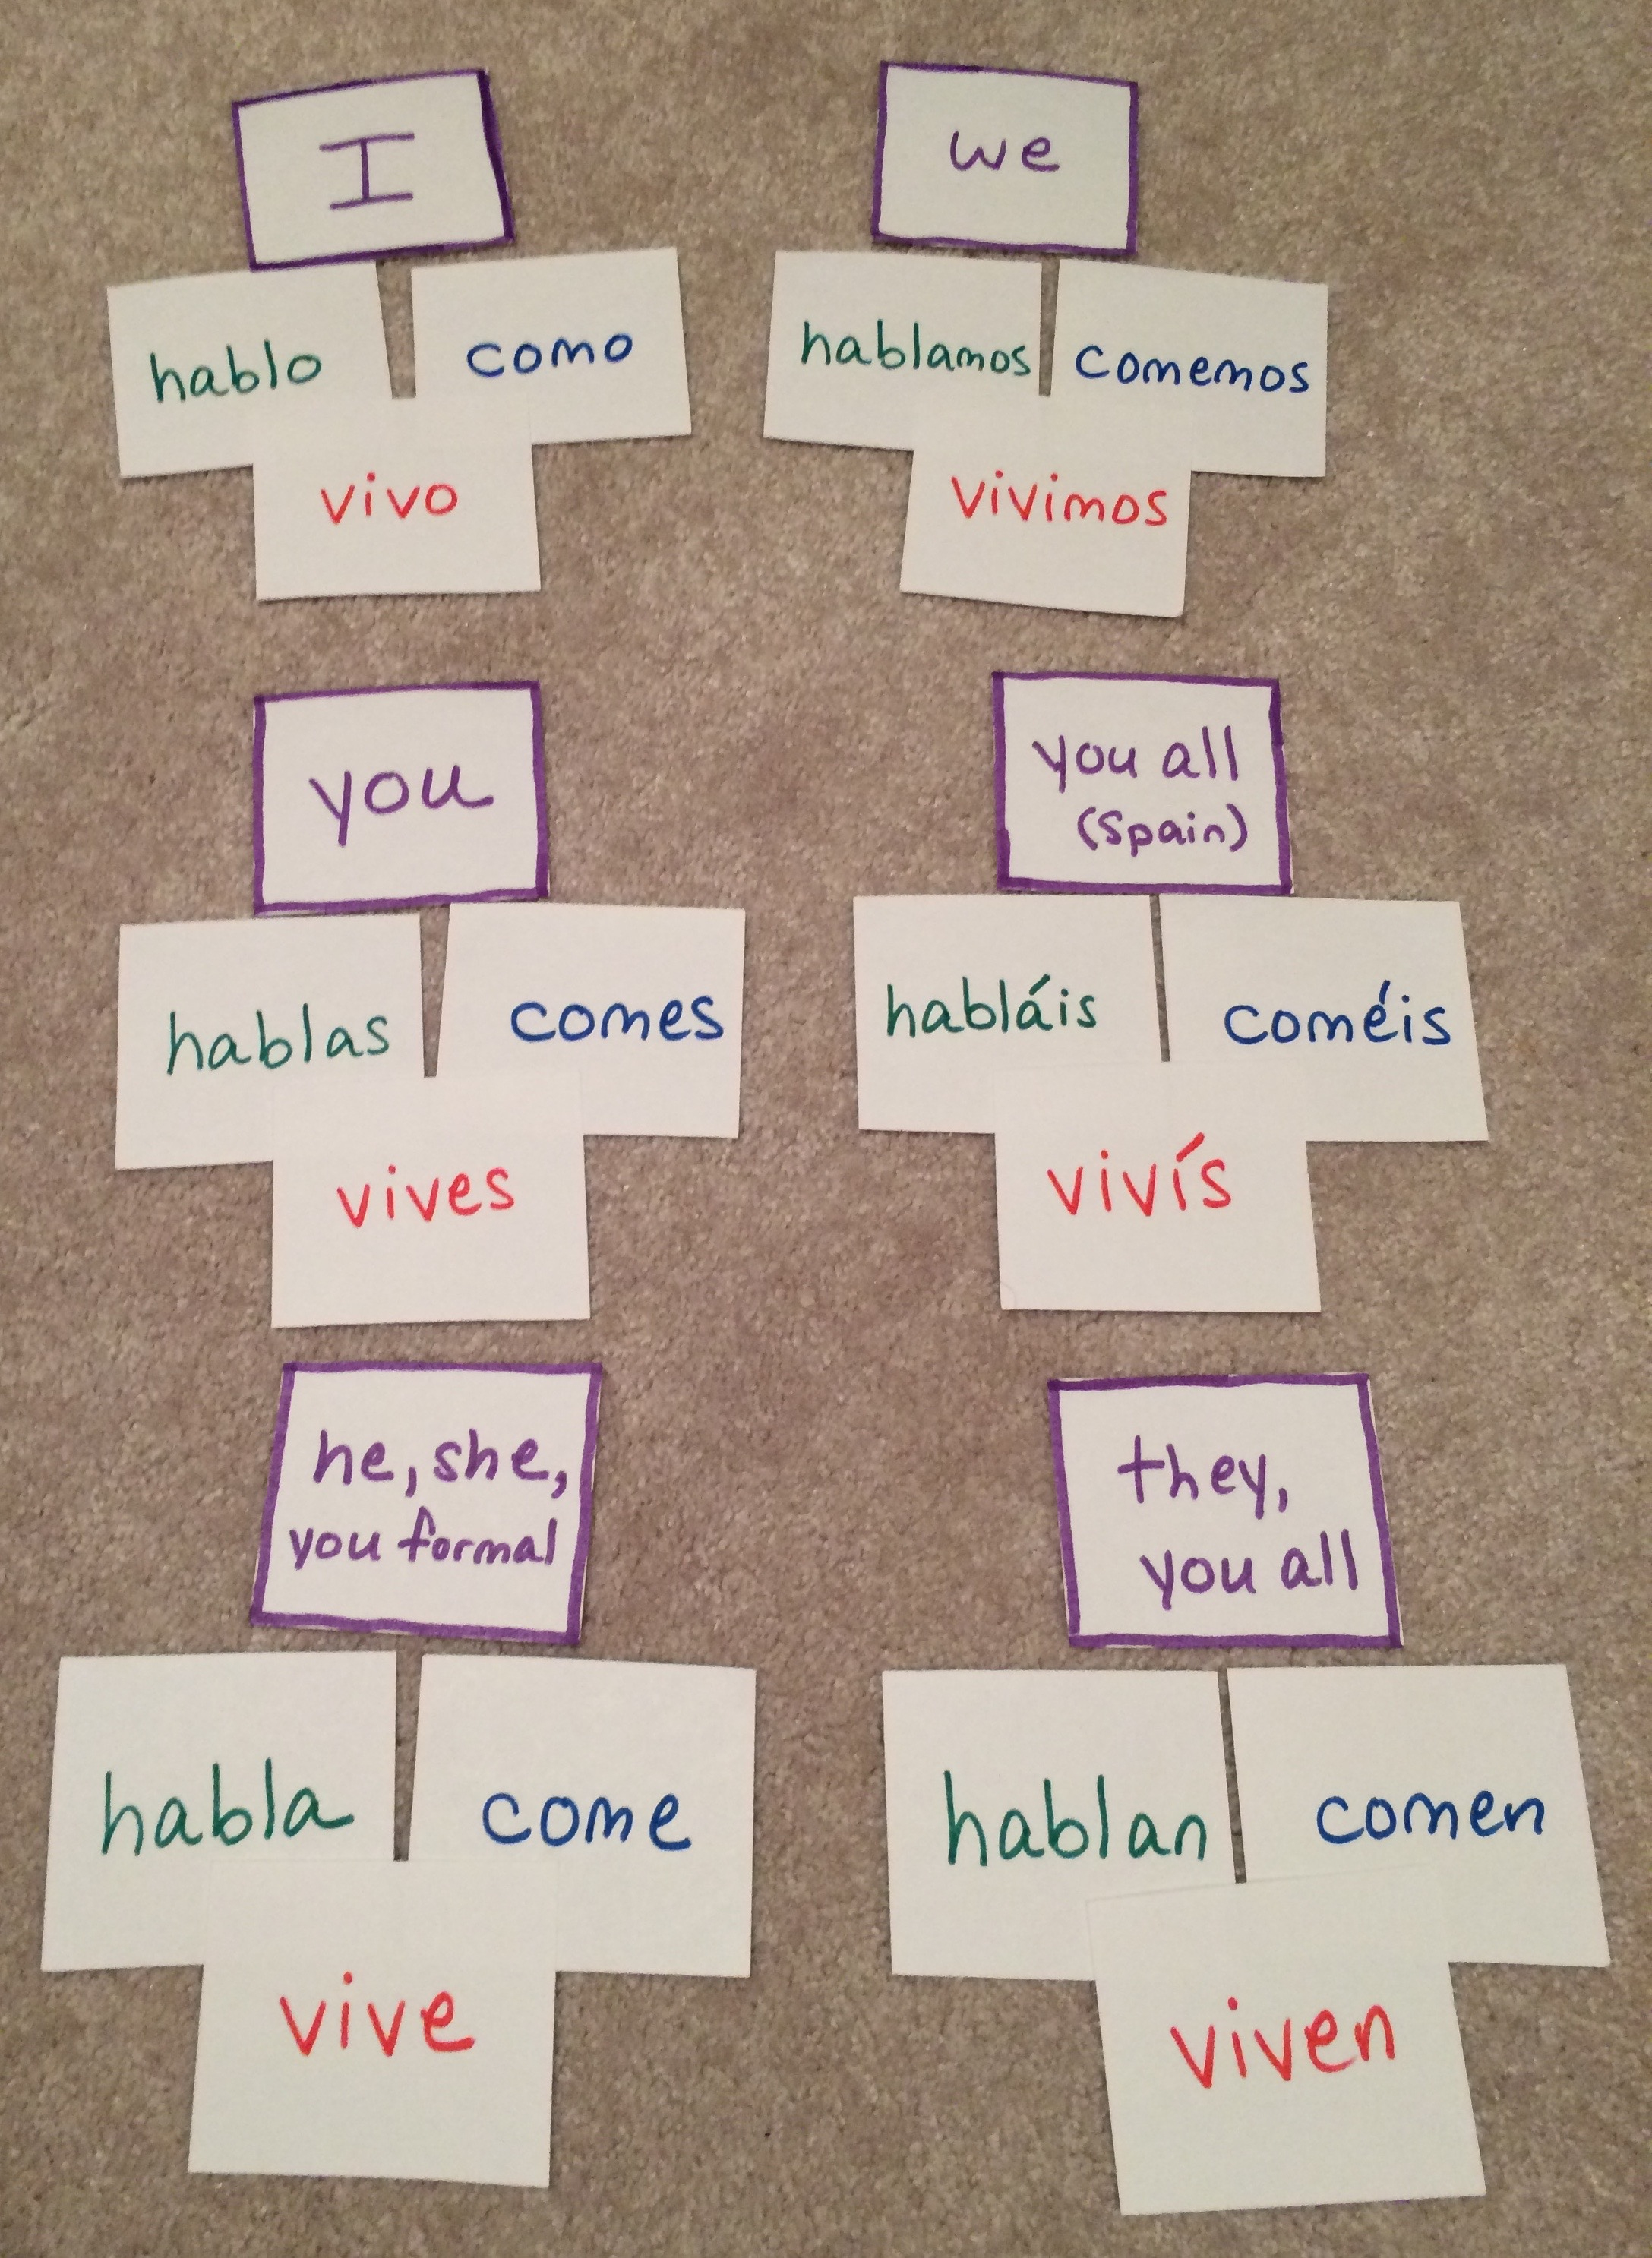 Spanish Verb Conjugation Activities For Kids - Spanish For You! - Free Printable Spanish Verb Flashcards